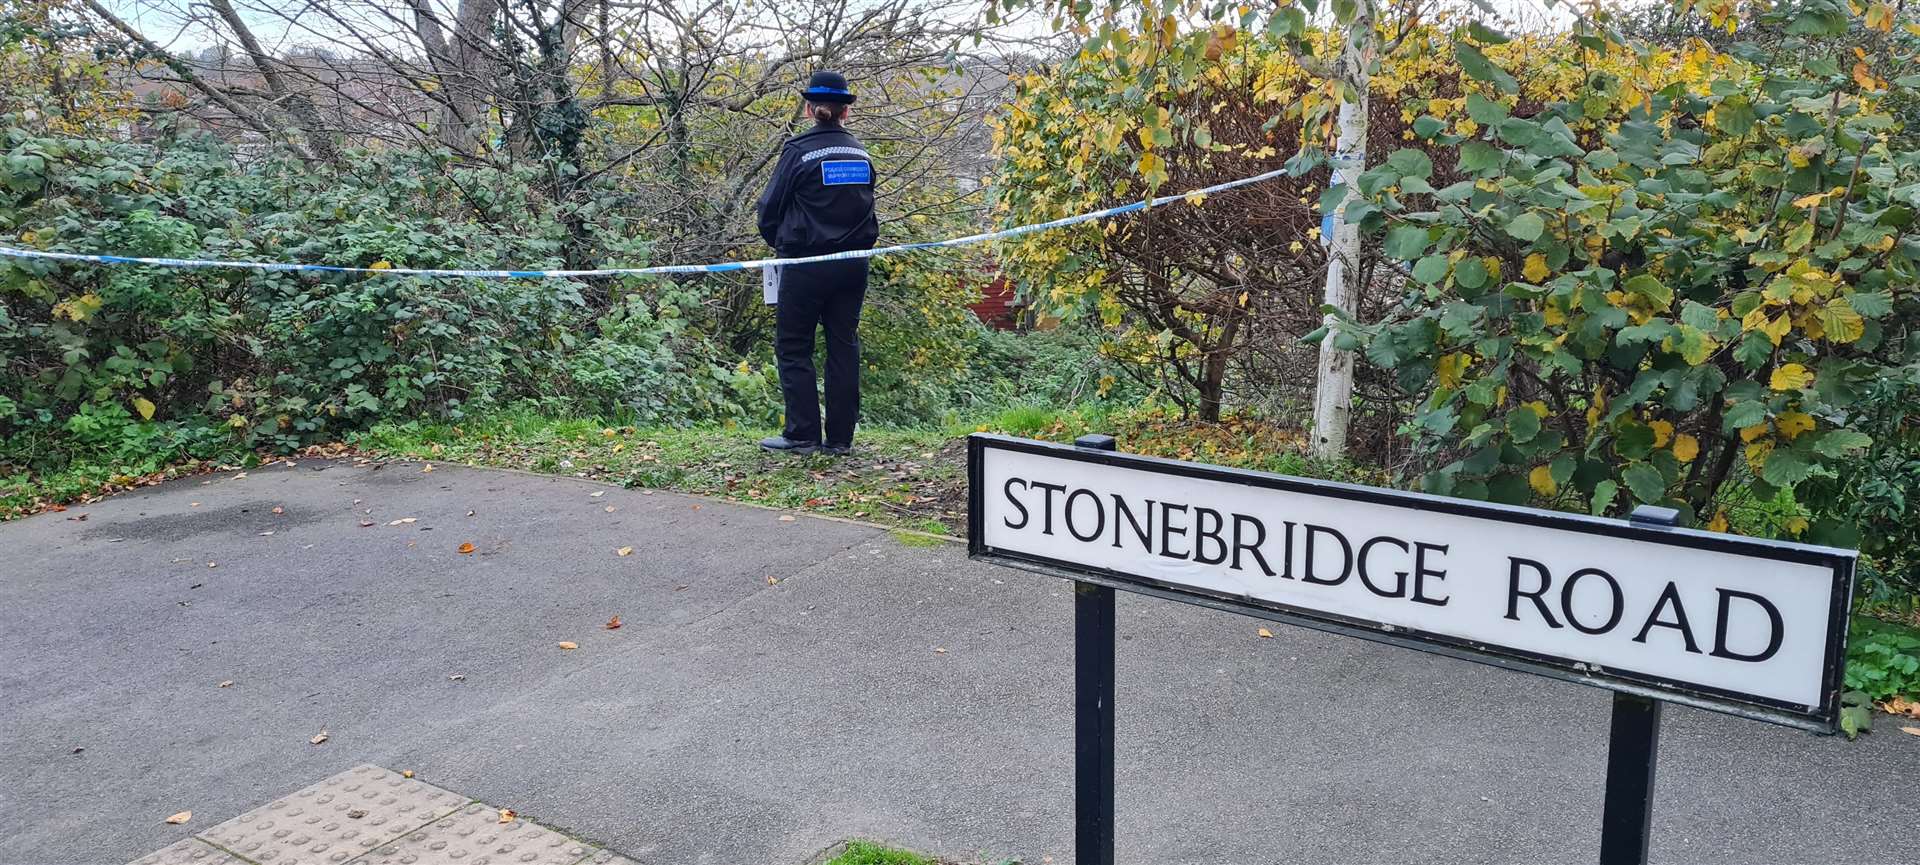 Emergency services have been called to Stonebridge Road